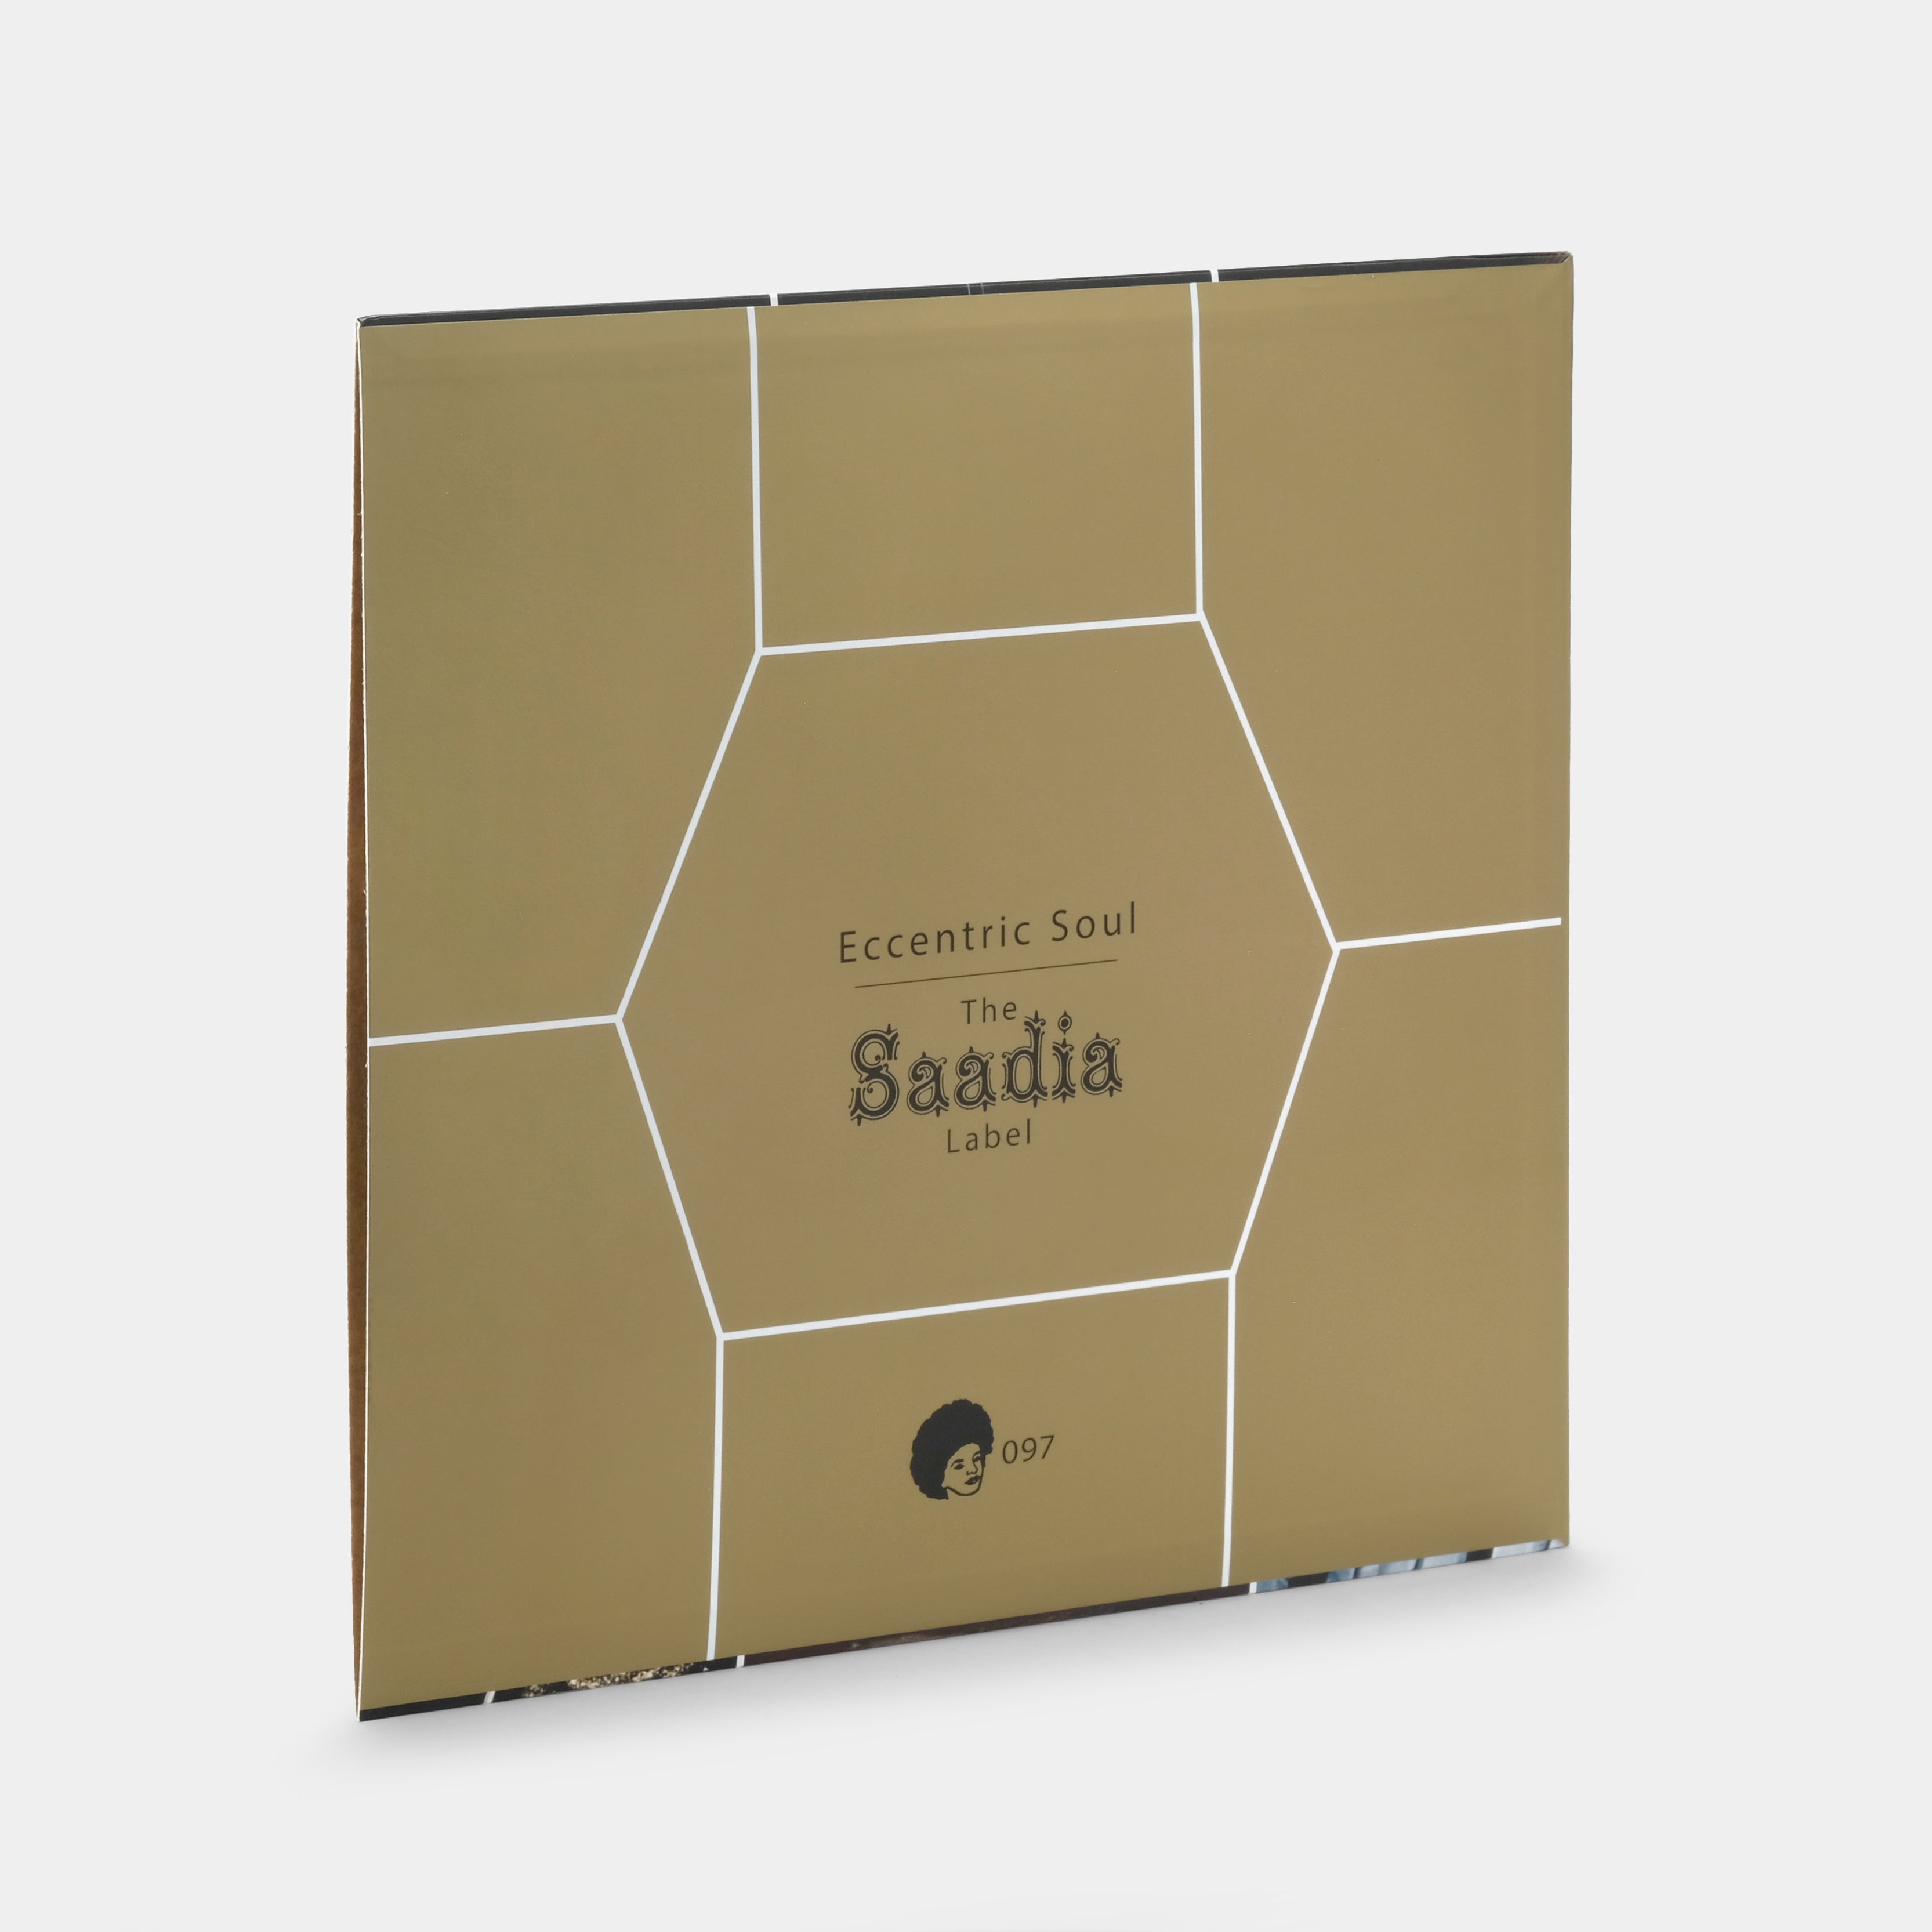 Eccentric Soul: The Saadia Label LP Super Funky Forest Green and Blue Splatter Vinyl Record